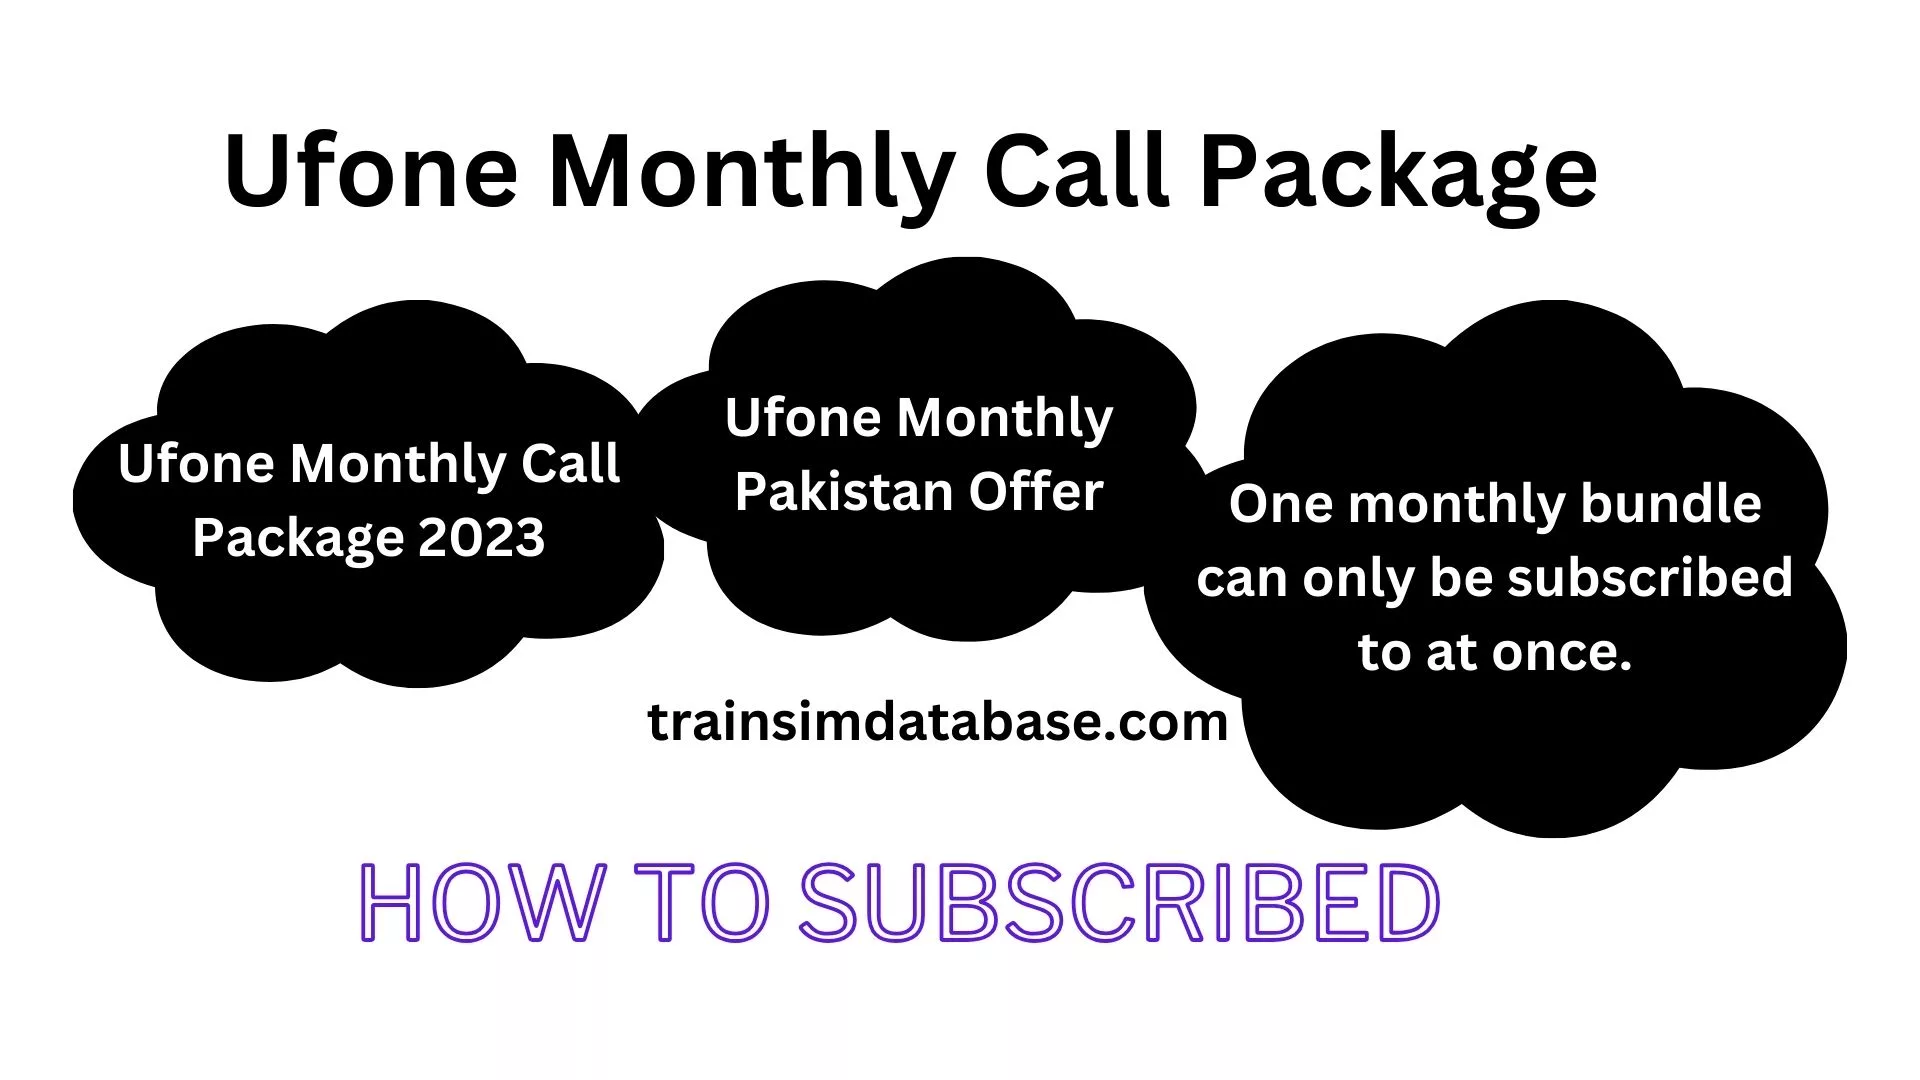 Ufone Monthly Call Package in 100 rs